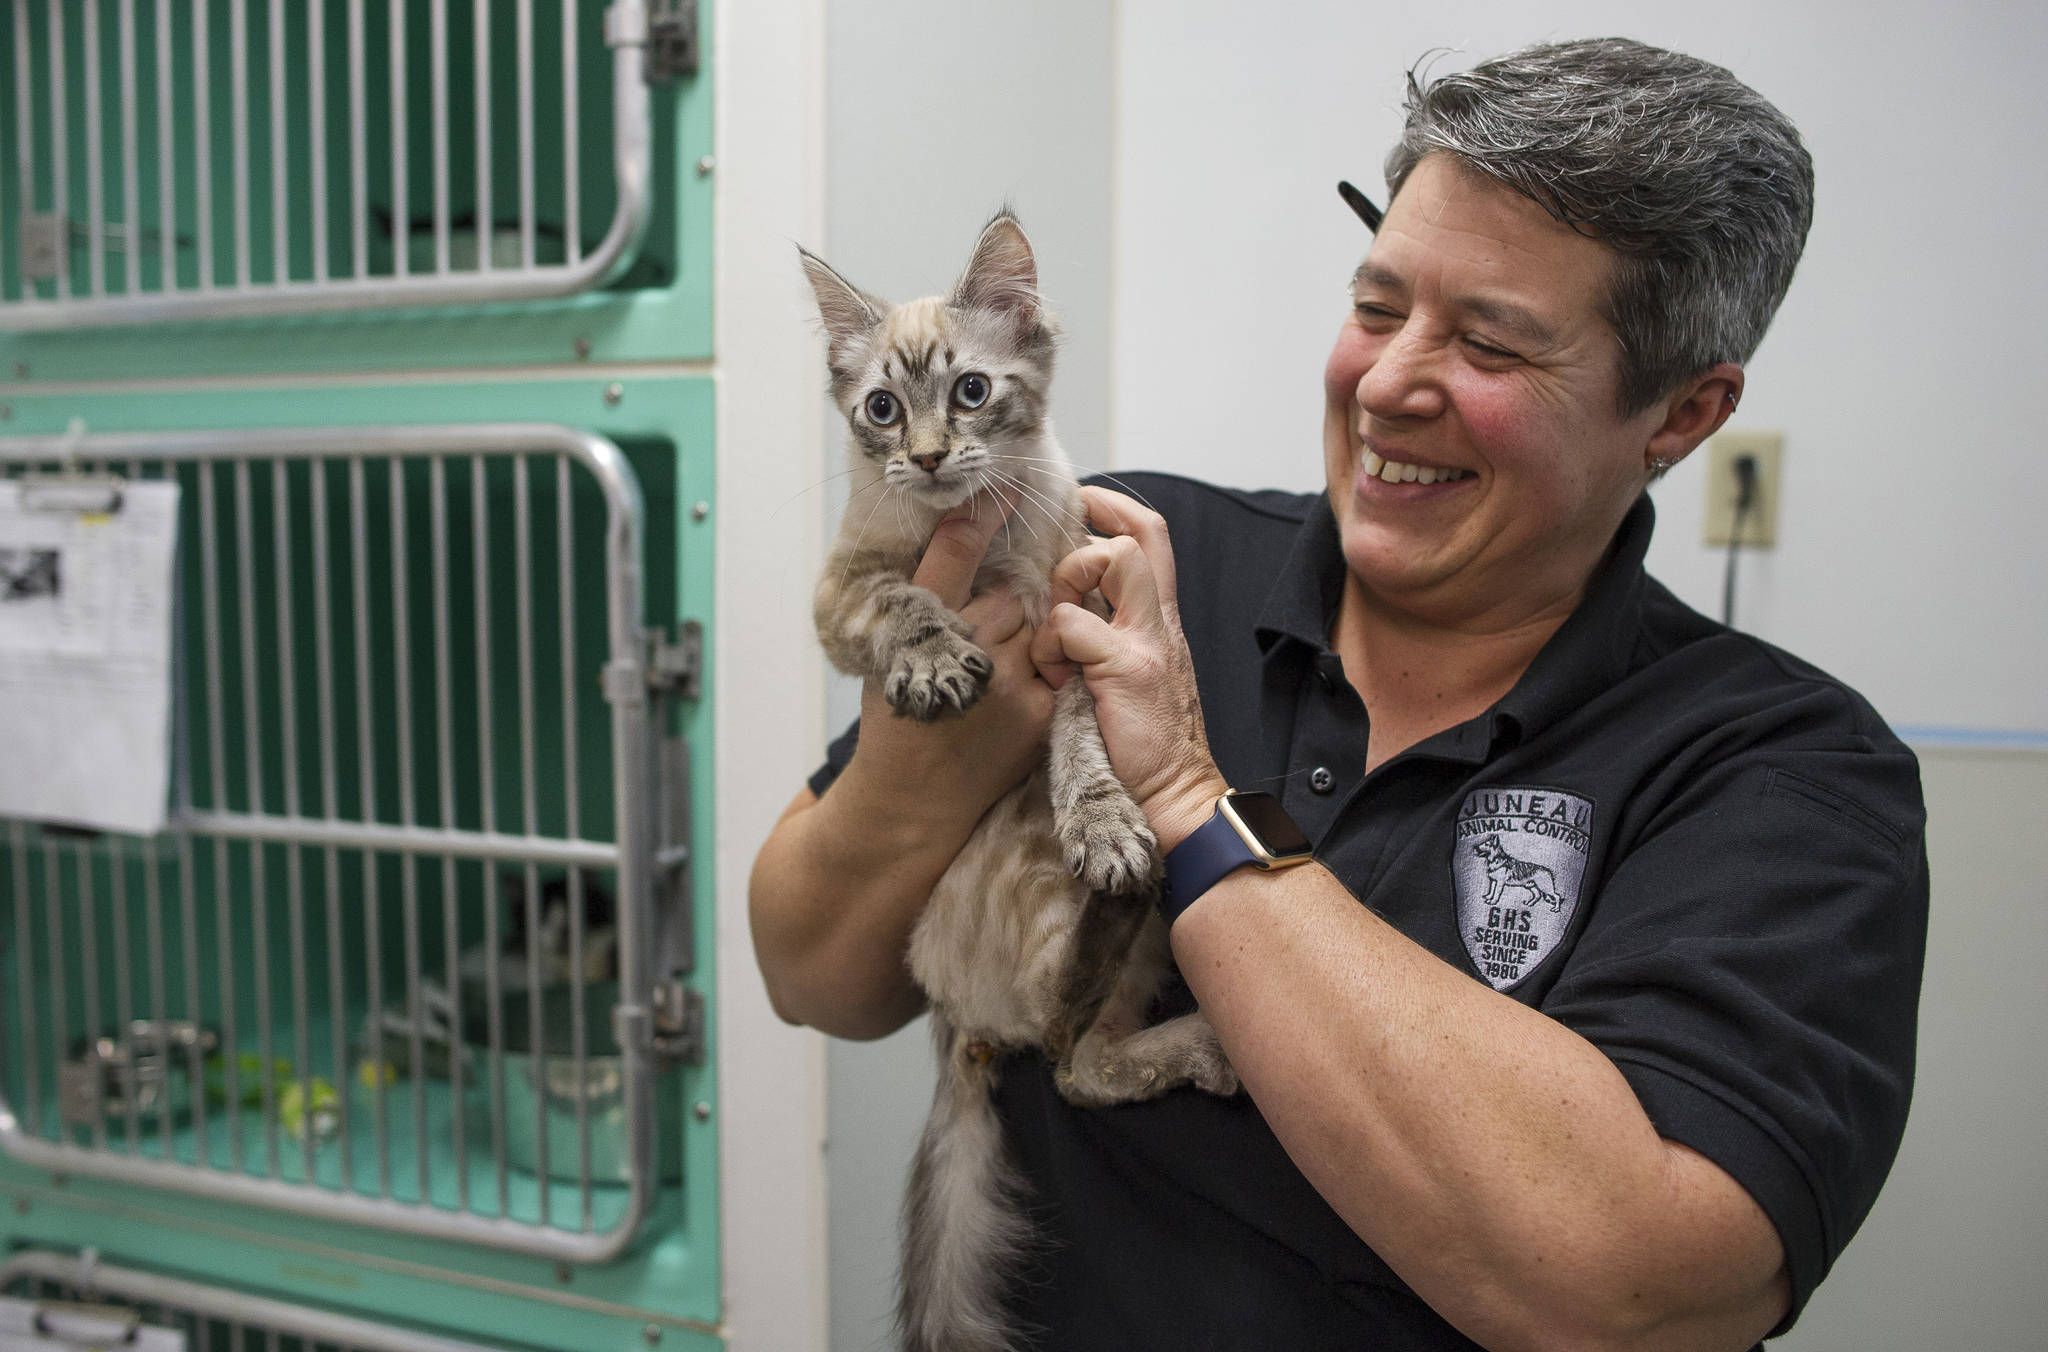 Animal Control Officer Karen Wood holds one of 27 cats rescued from a Juneau home last week at the Gastineau Humane Society on Thursday, Jan. 11, 2018. The first batch of cats will be available for adoption on Monday with more later in the week. (Michael Penn | Juneau Empire)